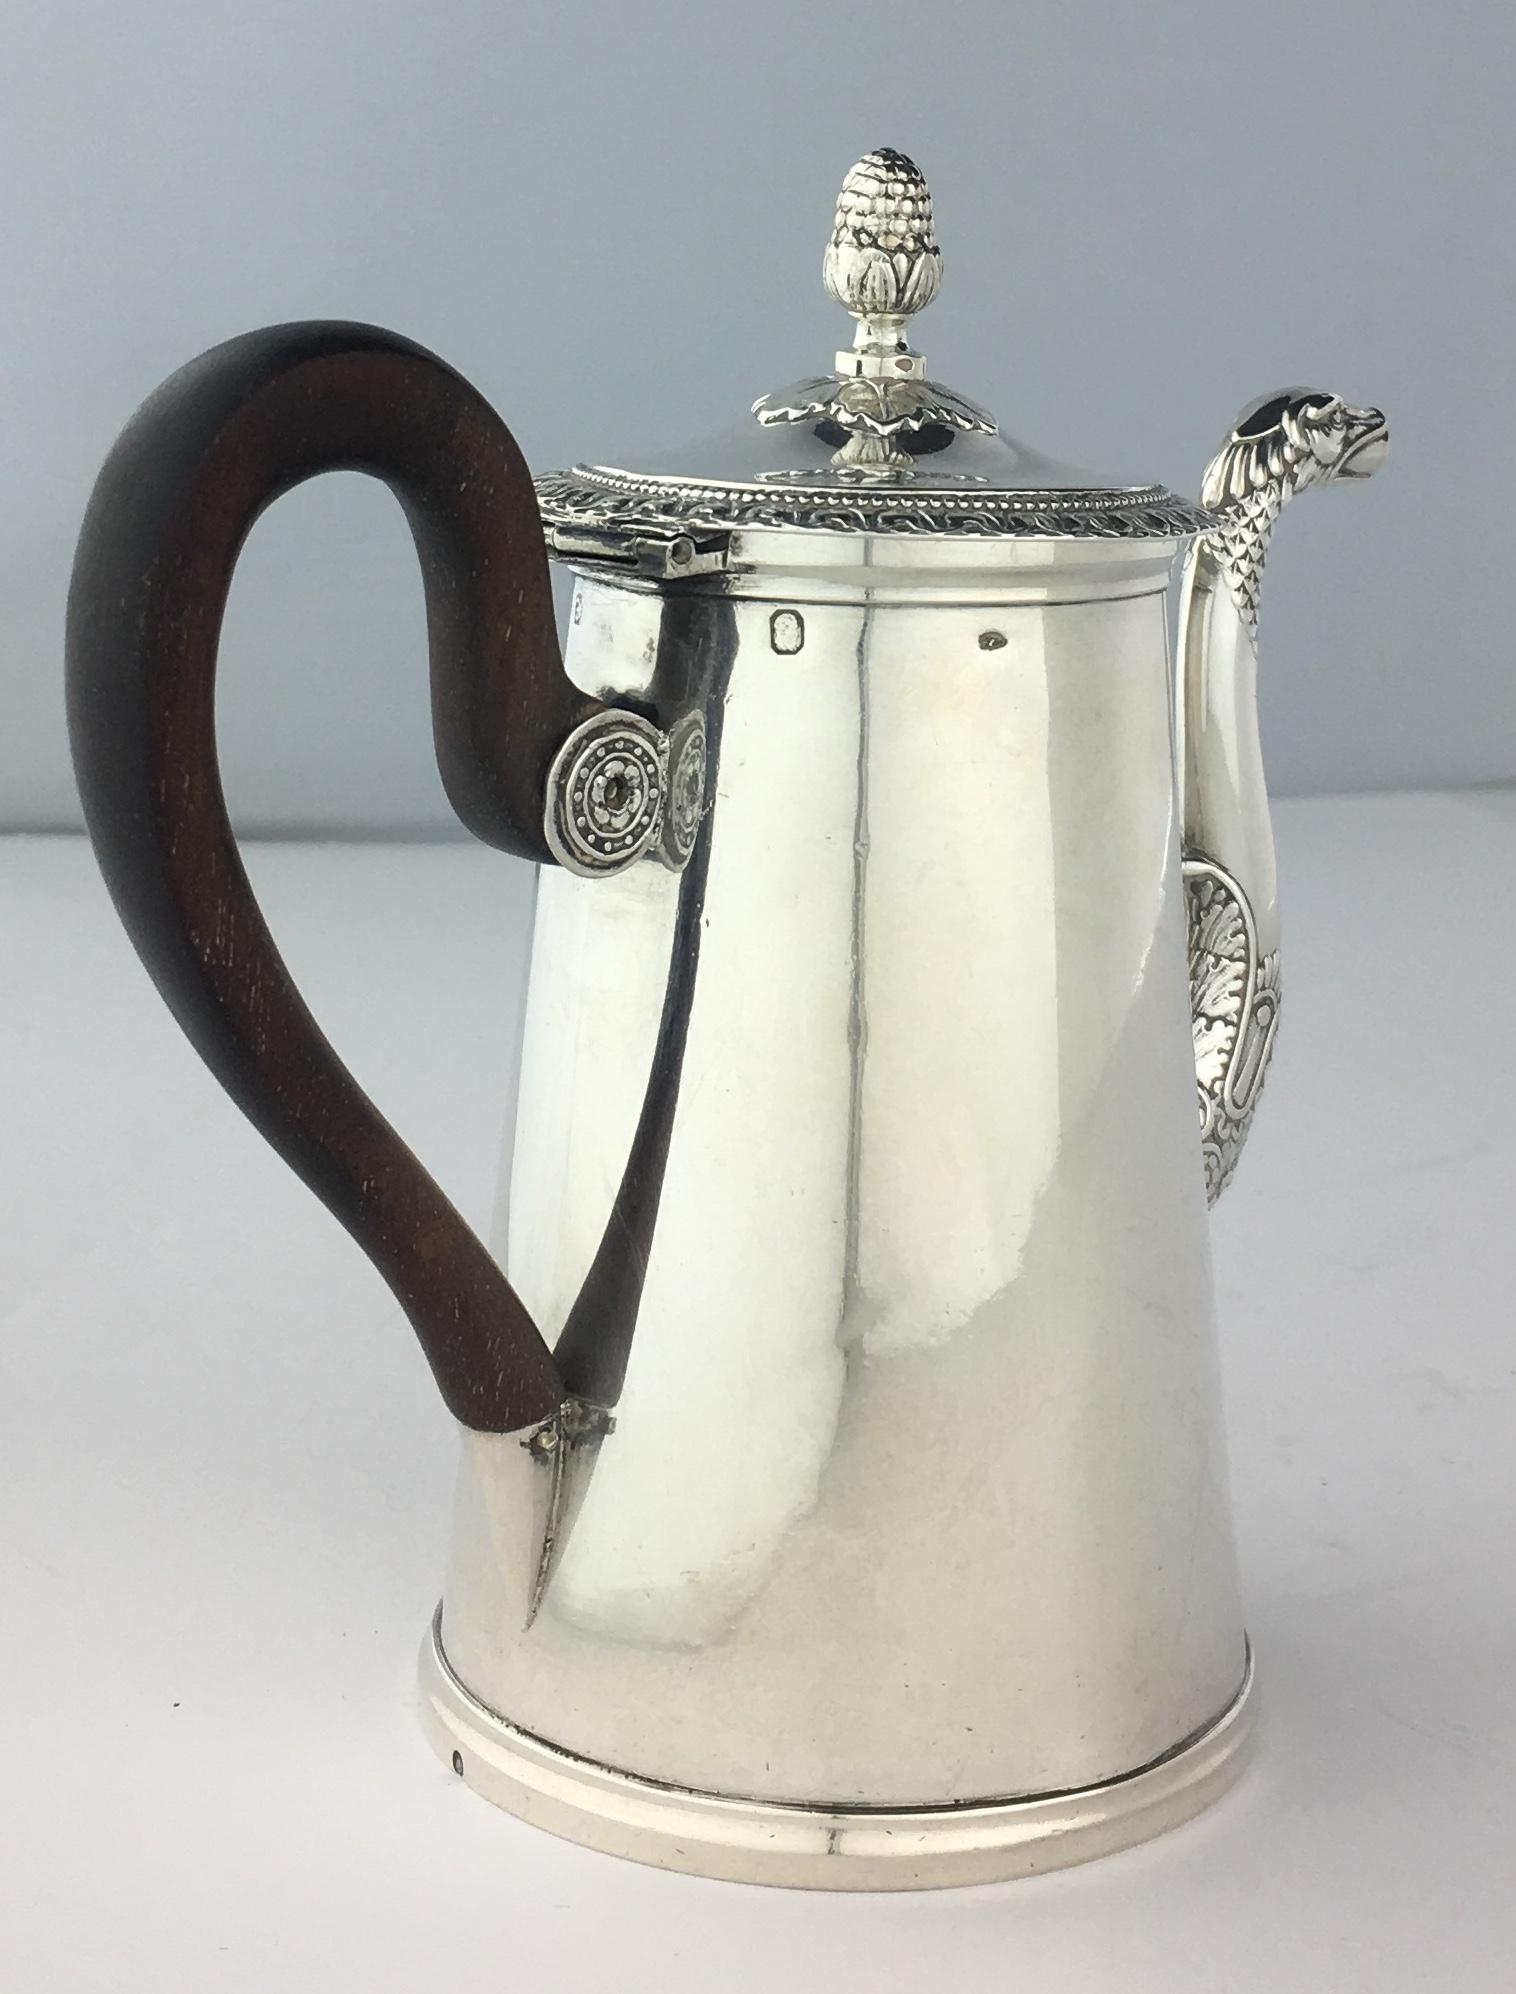 An elegant 19th century French hallmarked sterling silver chocolate pot with embossed decoration. The pot is decorated with a band around the top. There is embossed decoration on top and bottom of mouth and around silver handle attachment. 

Pot has